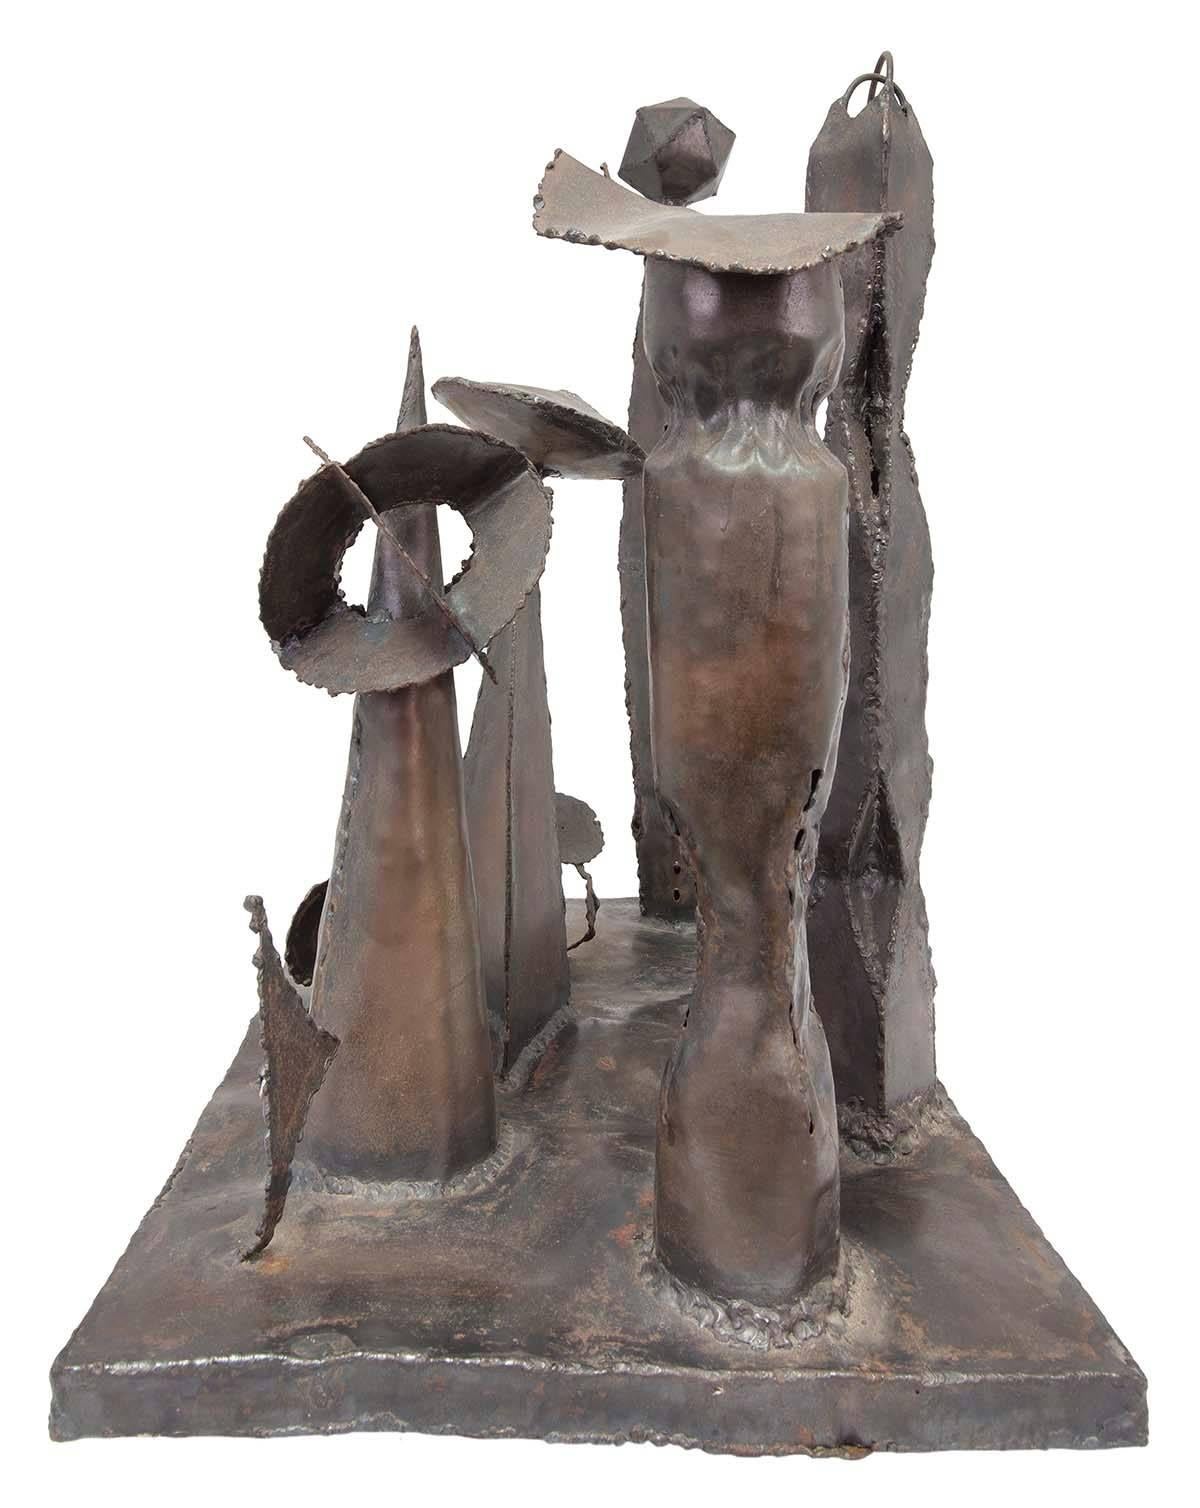 In this bronze sculpture the artist (unknown) has welded together a group of totems or monuments into a unified piece. T
Neo-Dada Abstract Sculpture: Assemblages

In contrast, abstract sculpture followed a slightly different course. Rather than